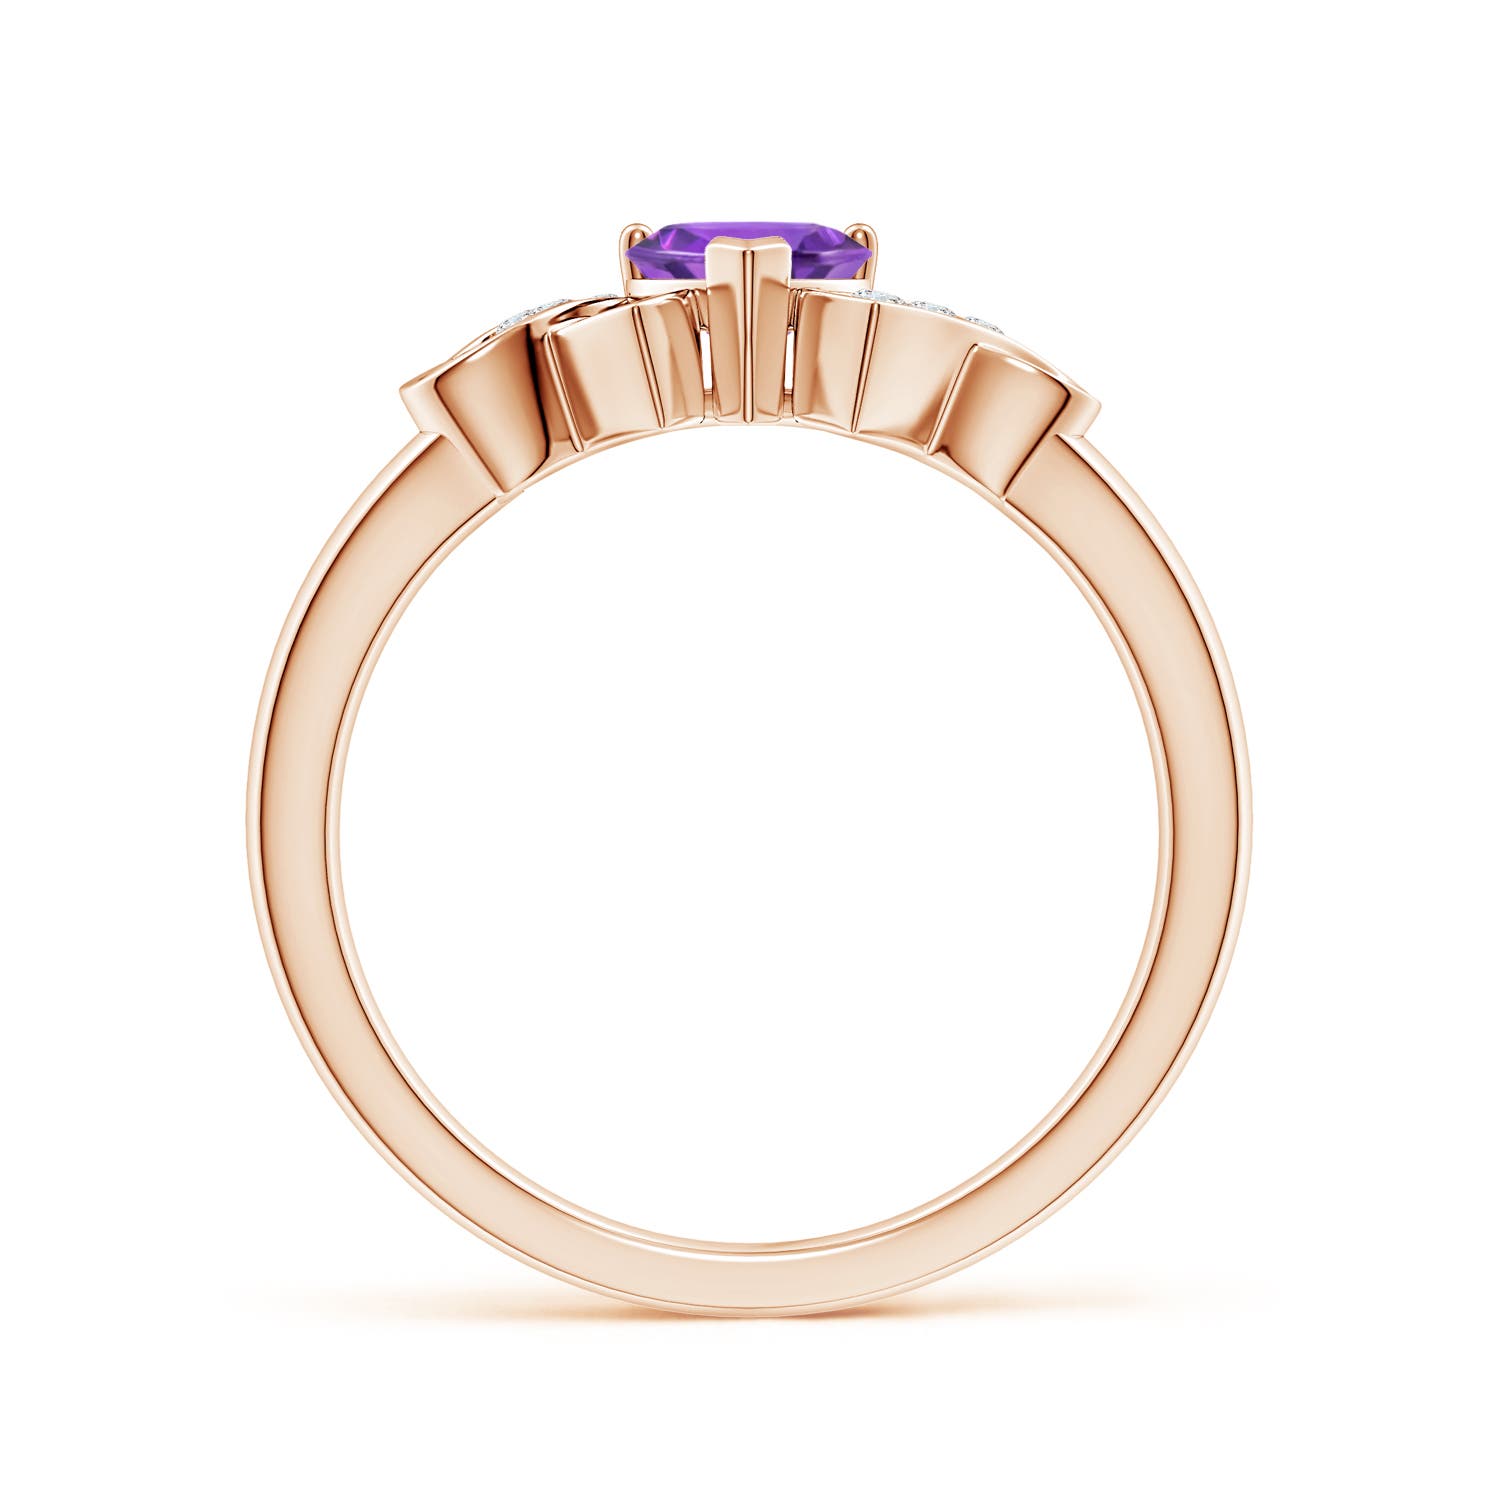 AAA - Amethyst / 0.41 CT / 14 KT Rose Gold